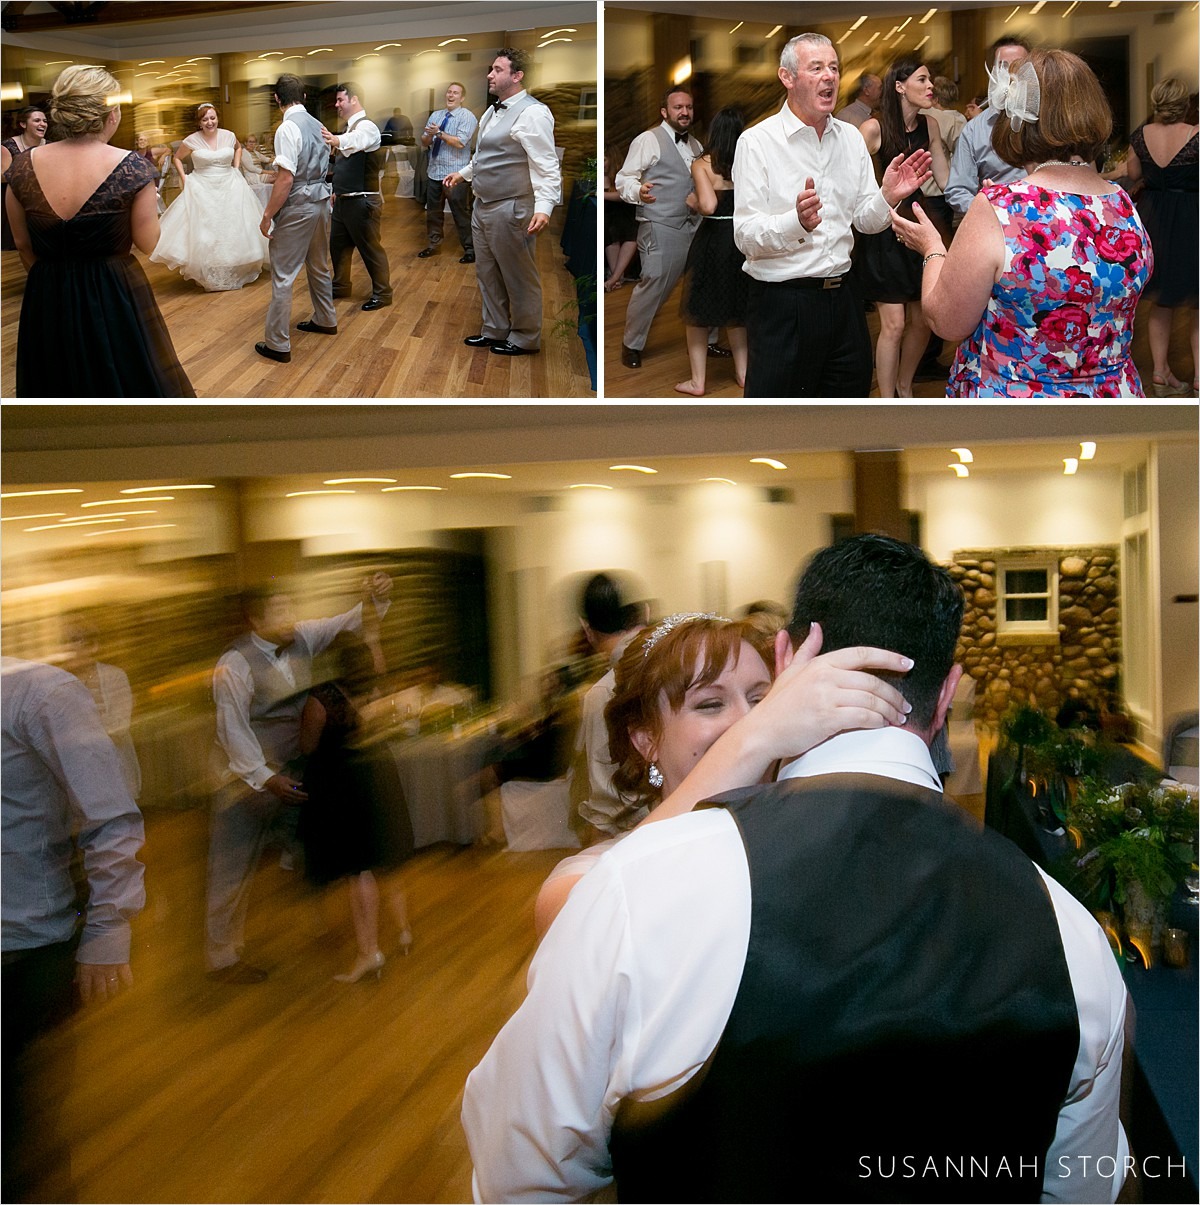 three images of dancing during a wedding reception